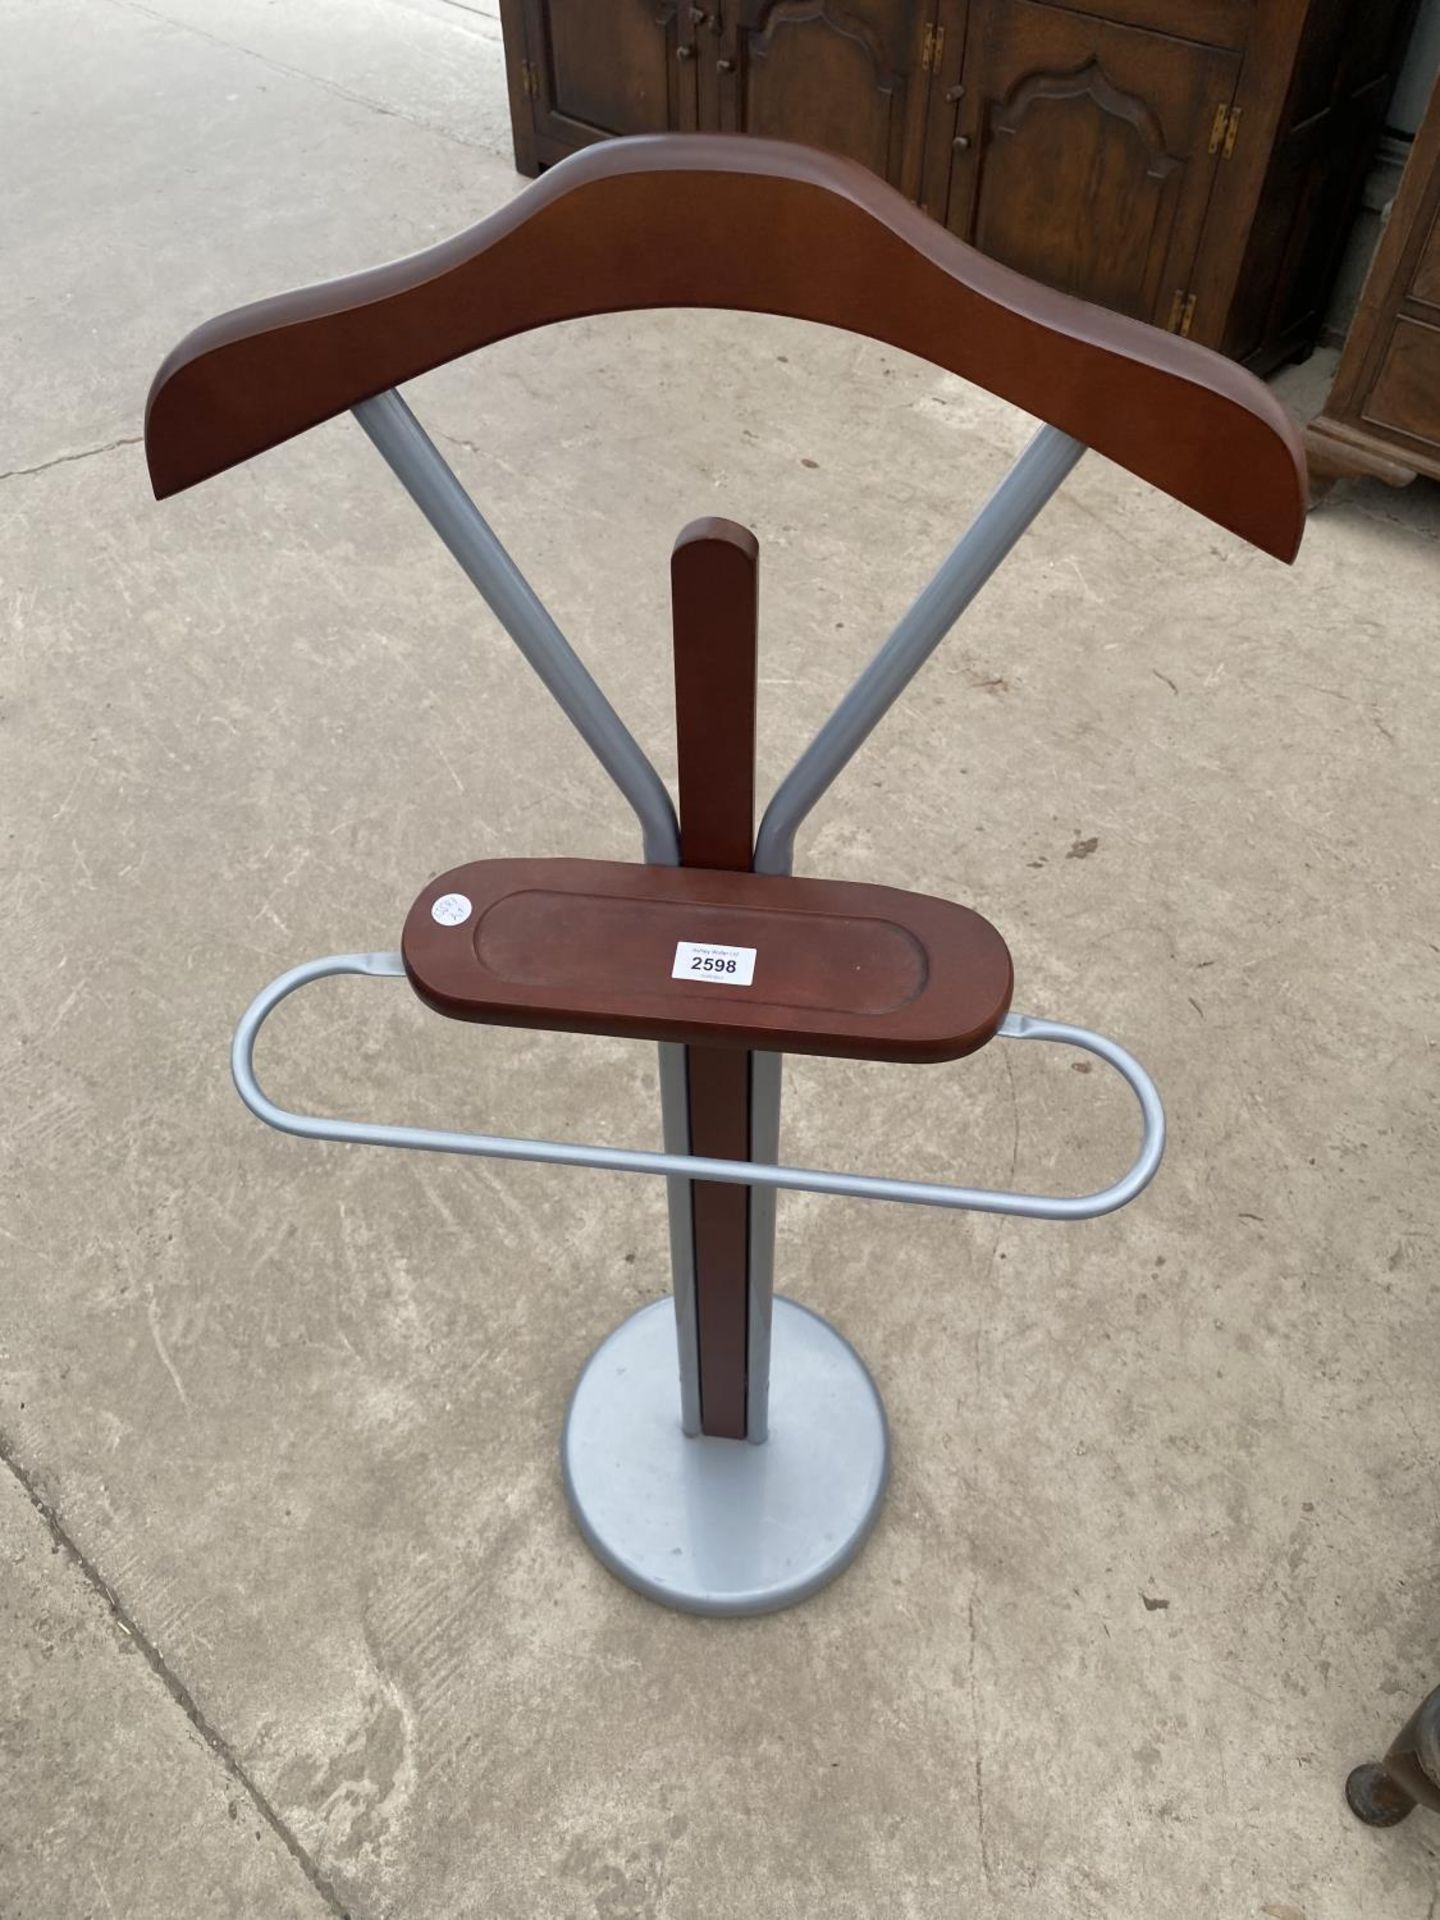 A MODERN SUIT STAND